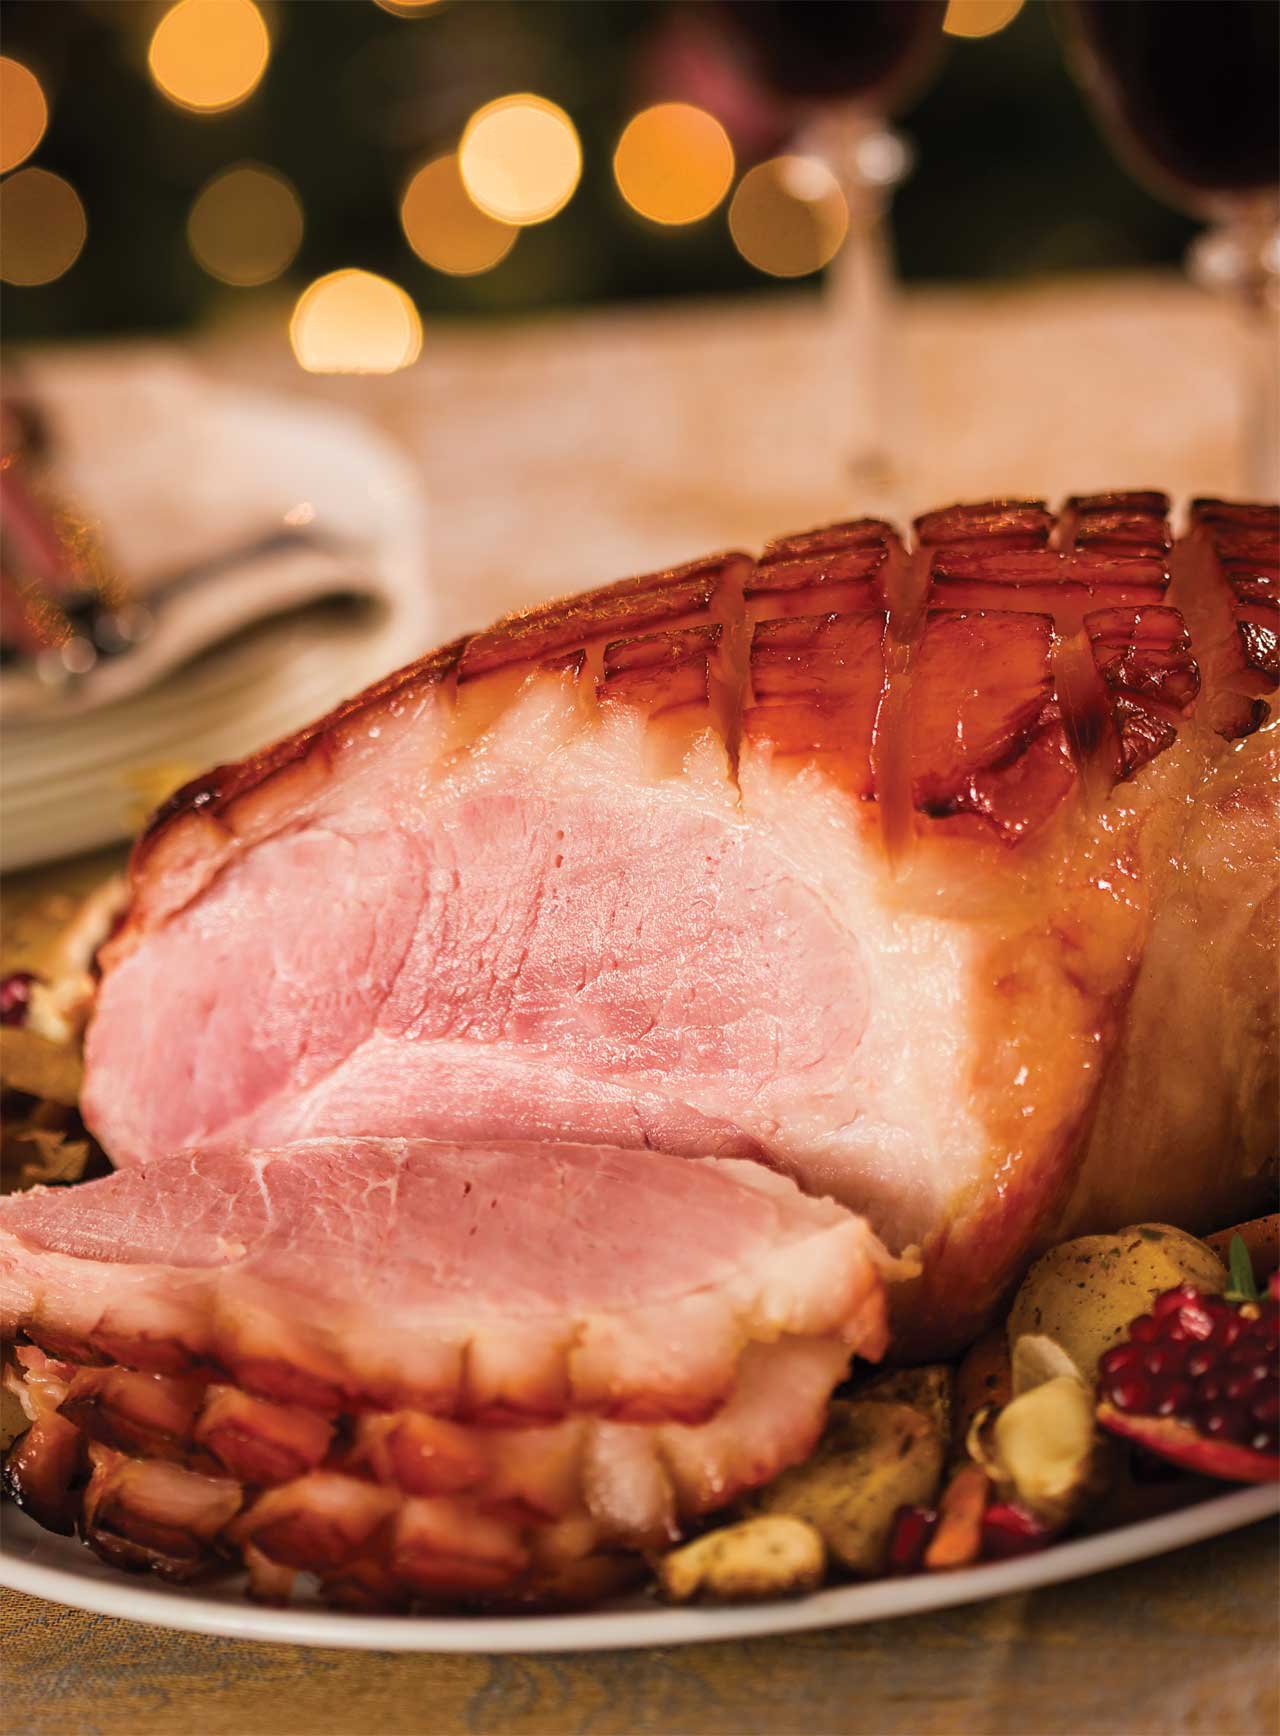 How to fry country ham - Feast and Farm